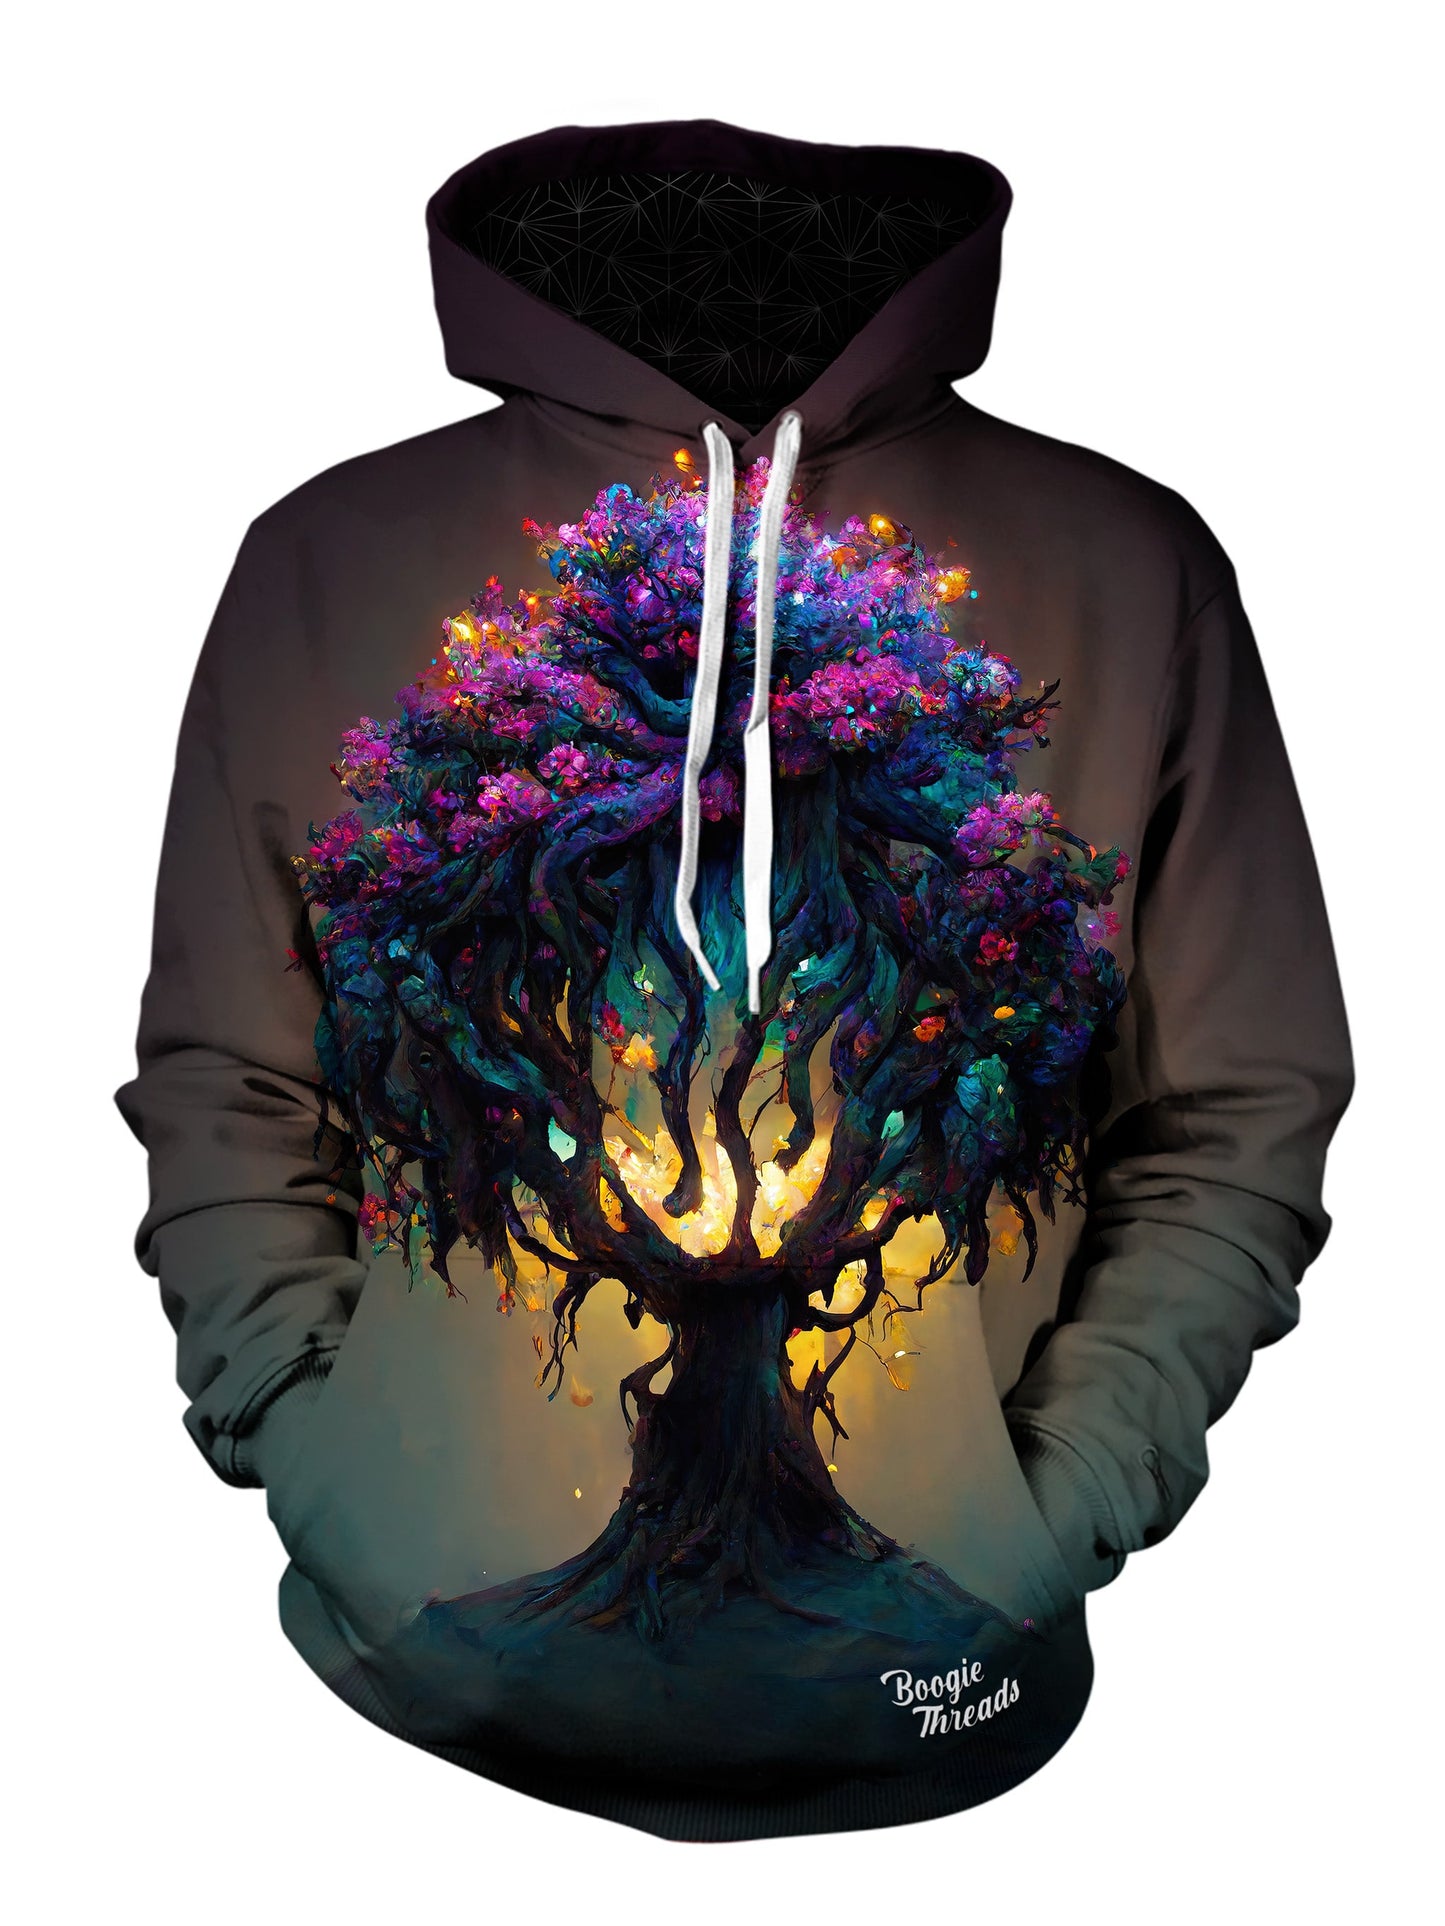 Wicked Winter Unisex Pullover Hoodie - EDM Festival Clothing - Boogie Threads